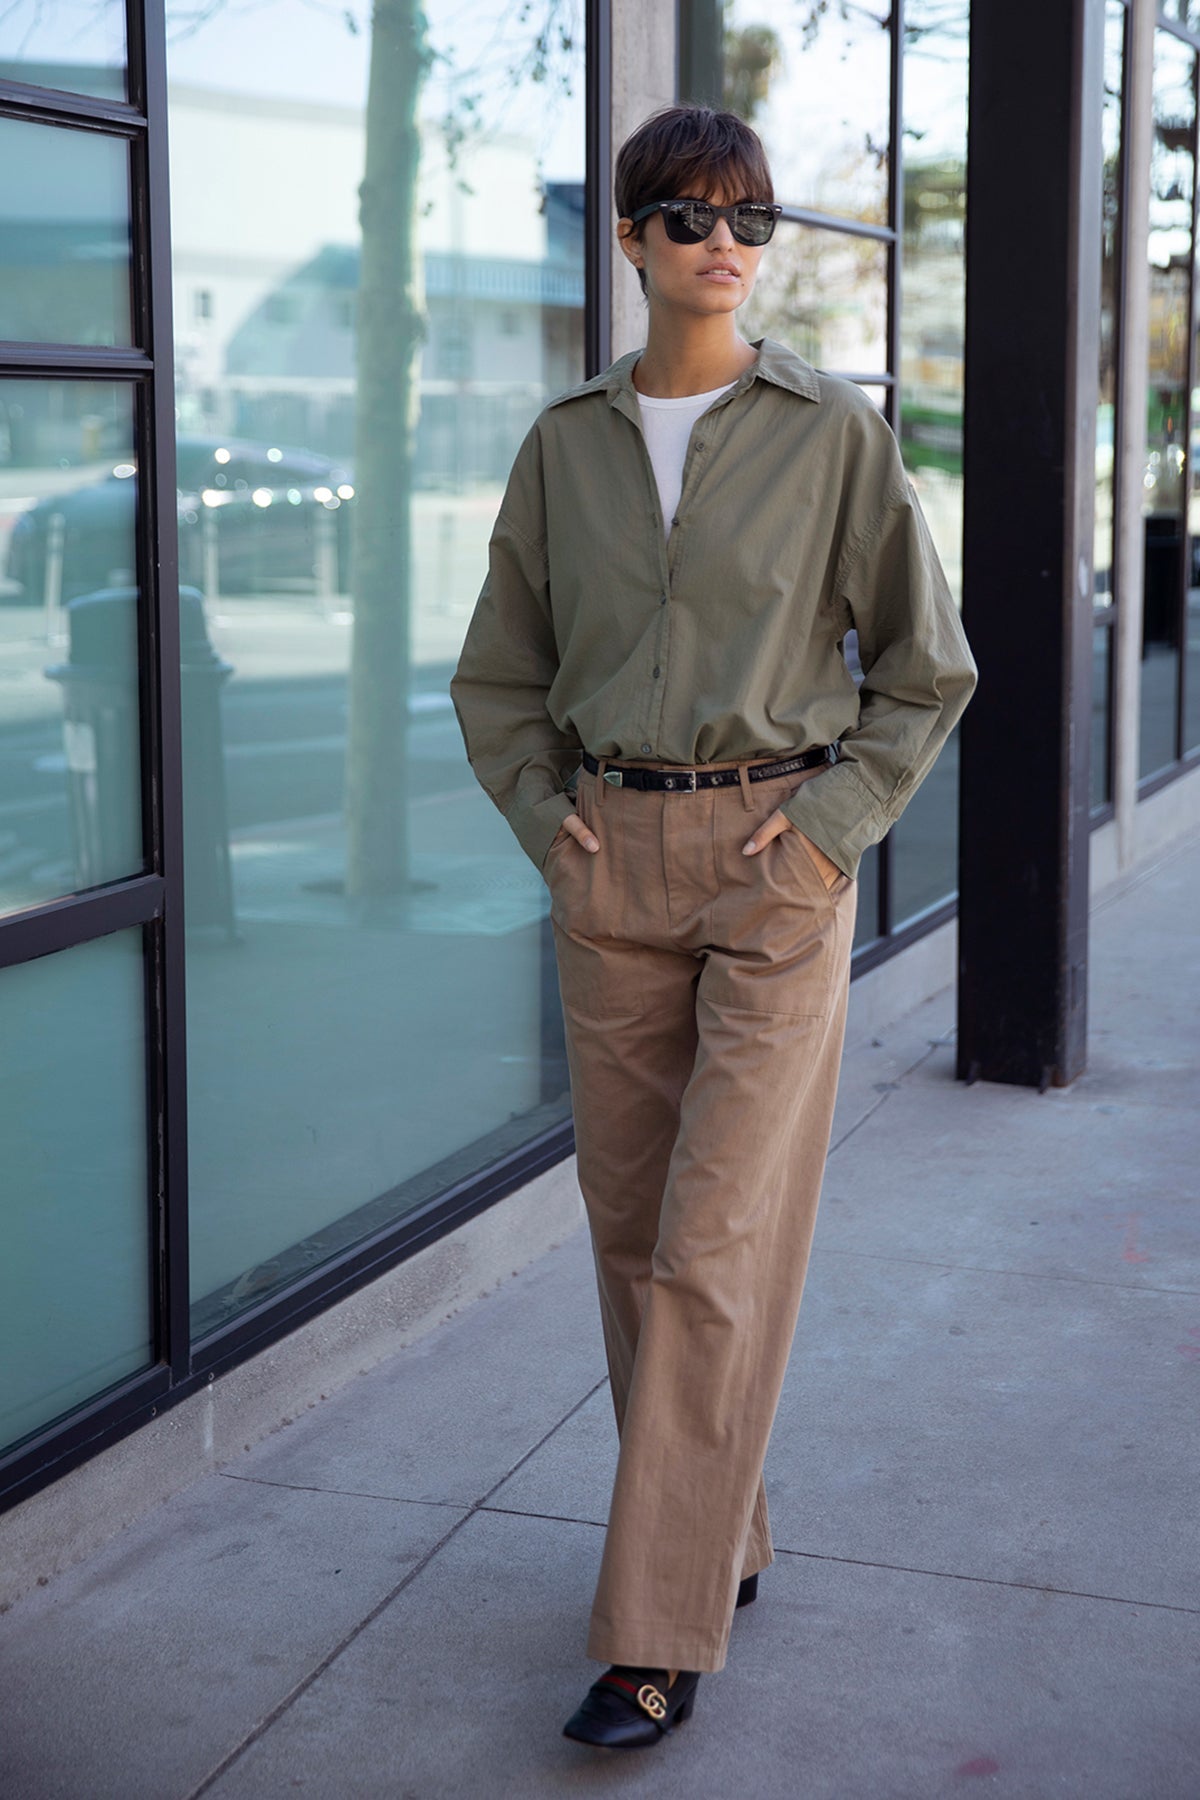 Redondo Shirt in thicket tucked into Ventura Pant side & back, model wearing sunglasses, black belt and black shoes, full length front-25870844231873